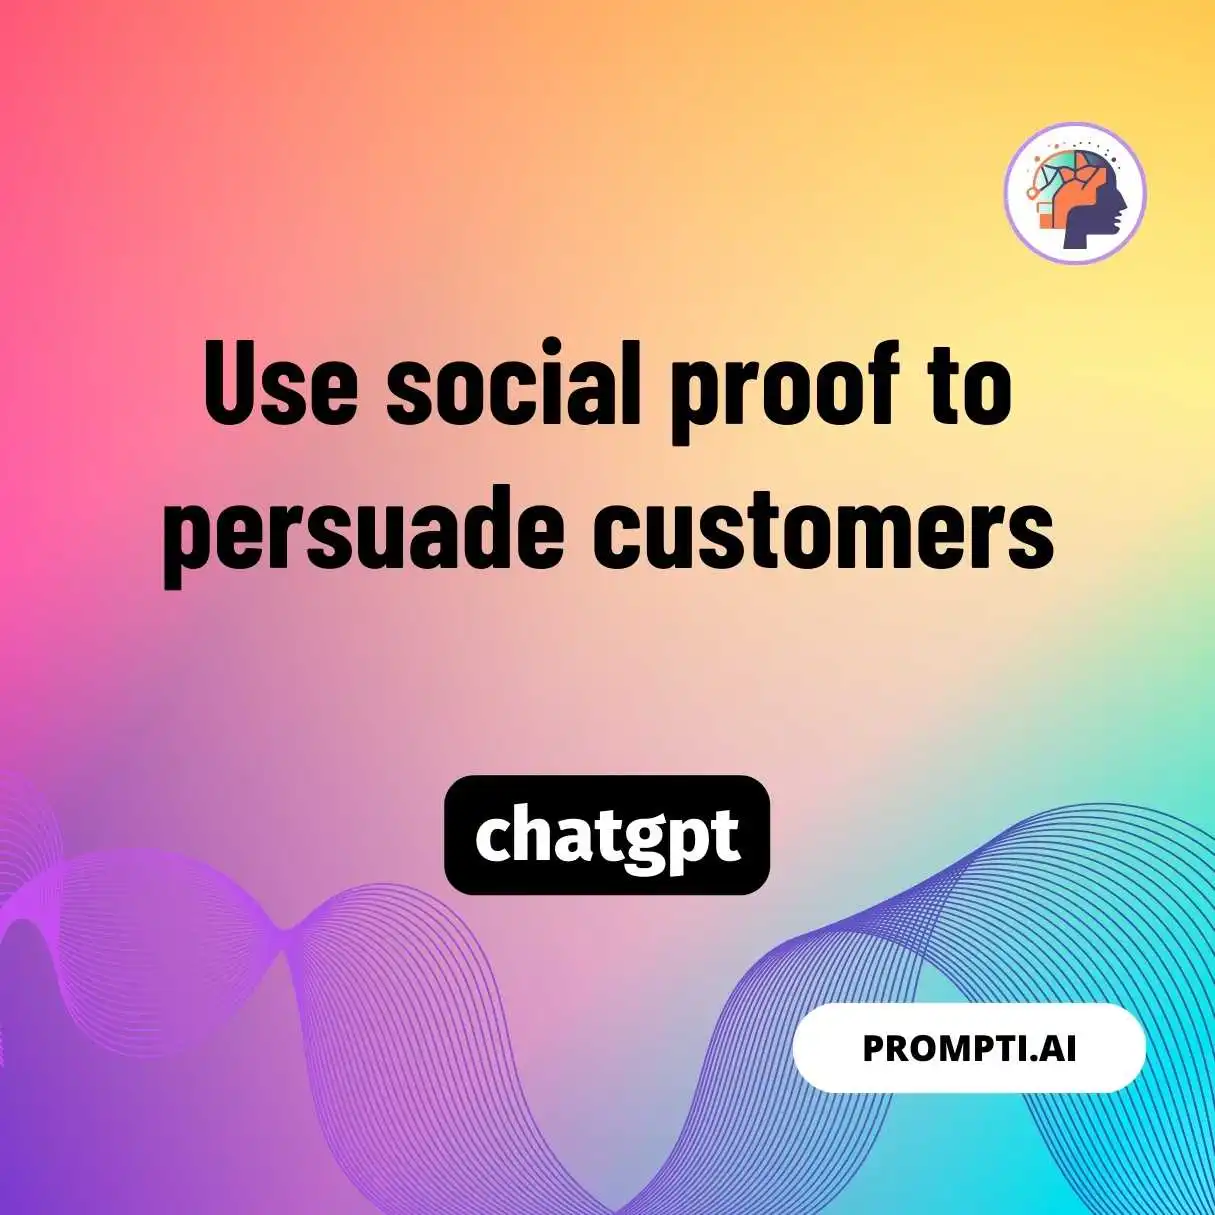 Use social proof to persuade customers